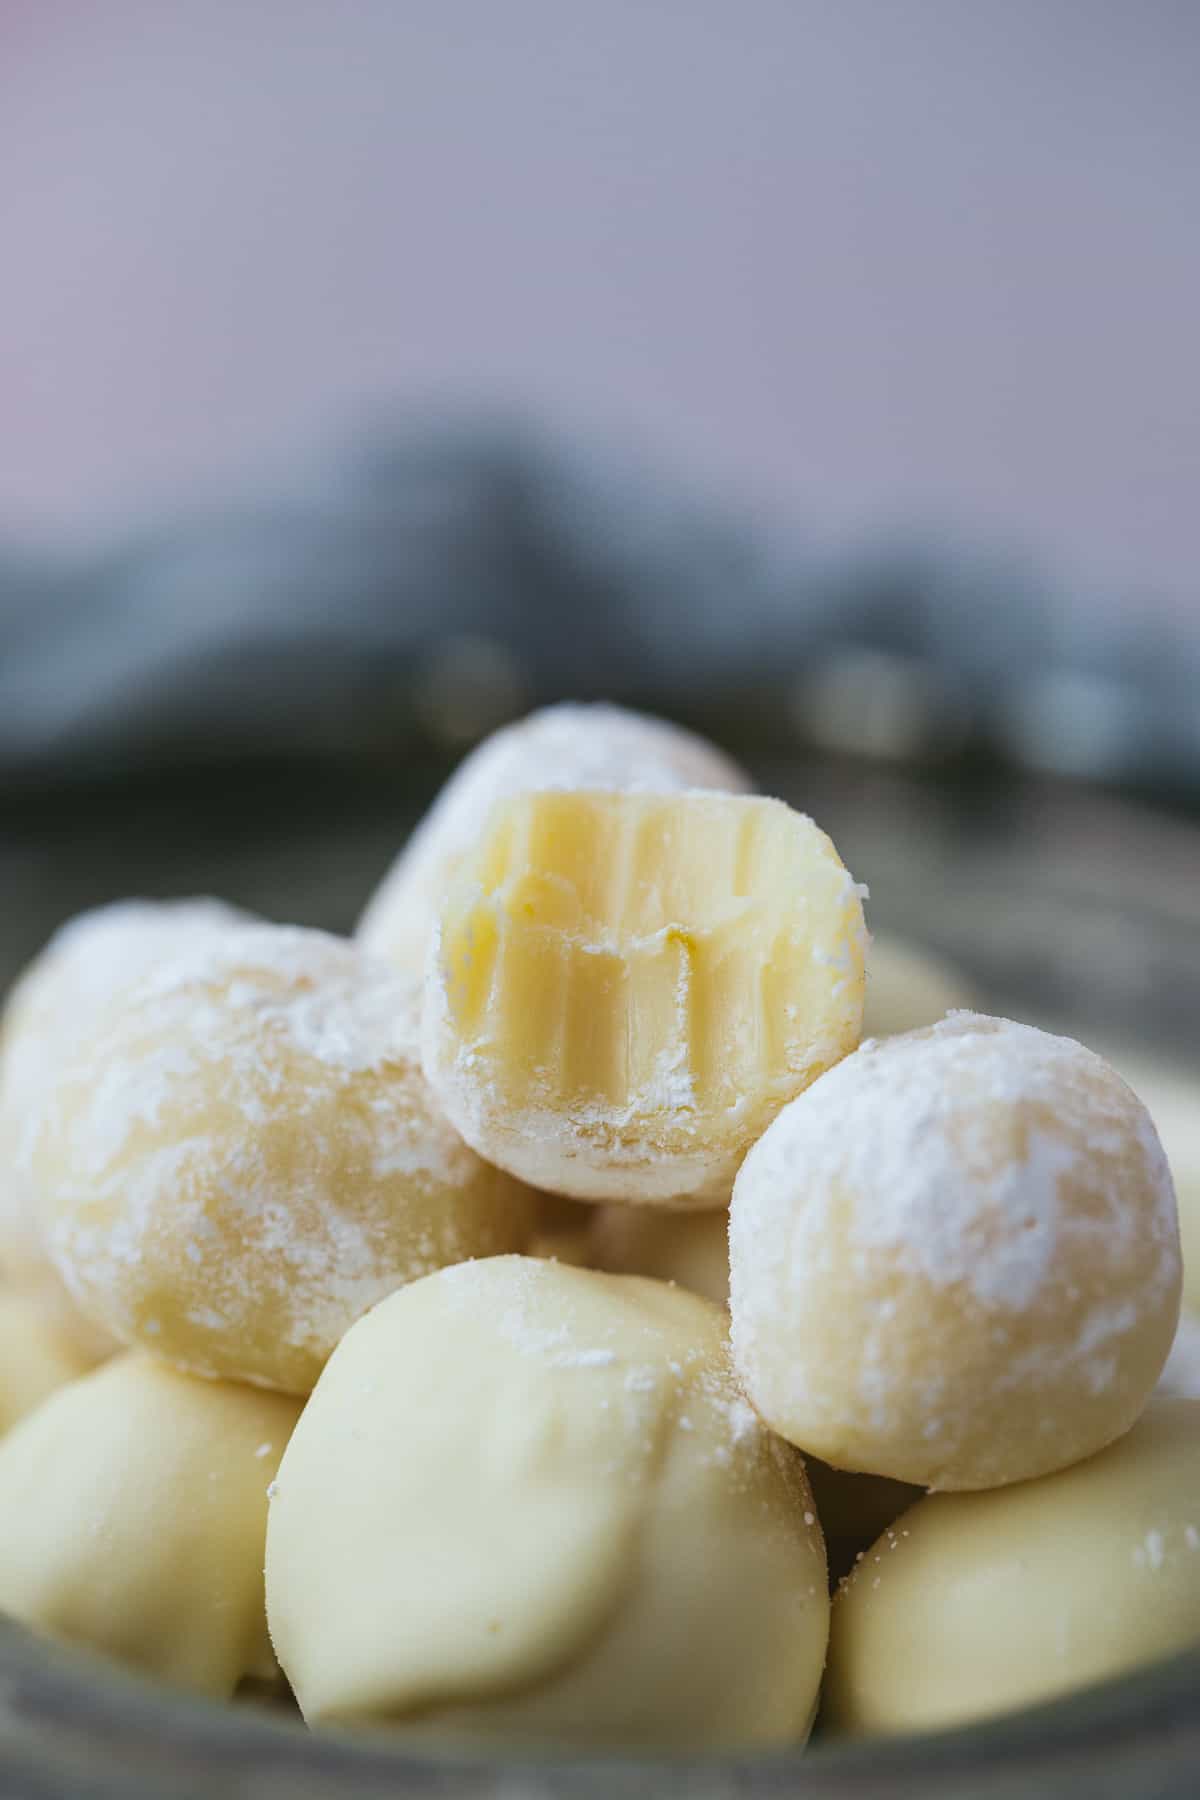 Close up image of a pile of white chocolate and lemon truffles. The truffle on top of the pile has had a bite taken out of it and teeth marks are visible. 